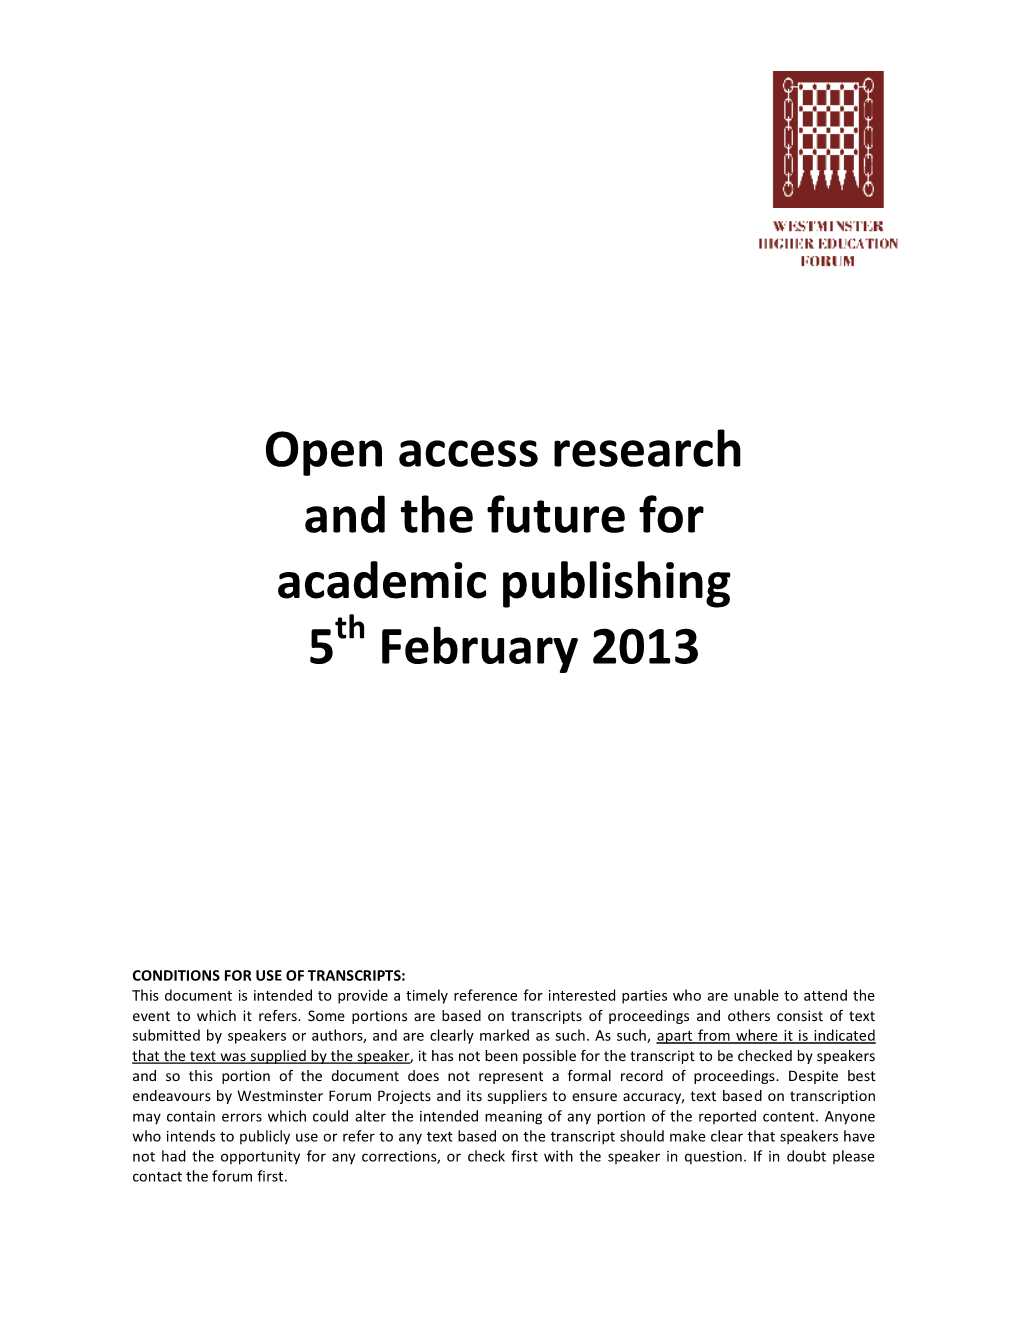 Open Access Research and the Future for Academic Publishing 5 February